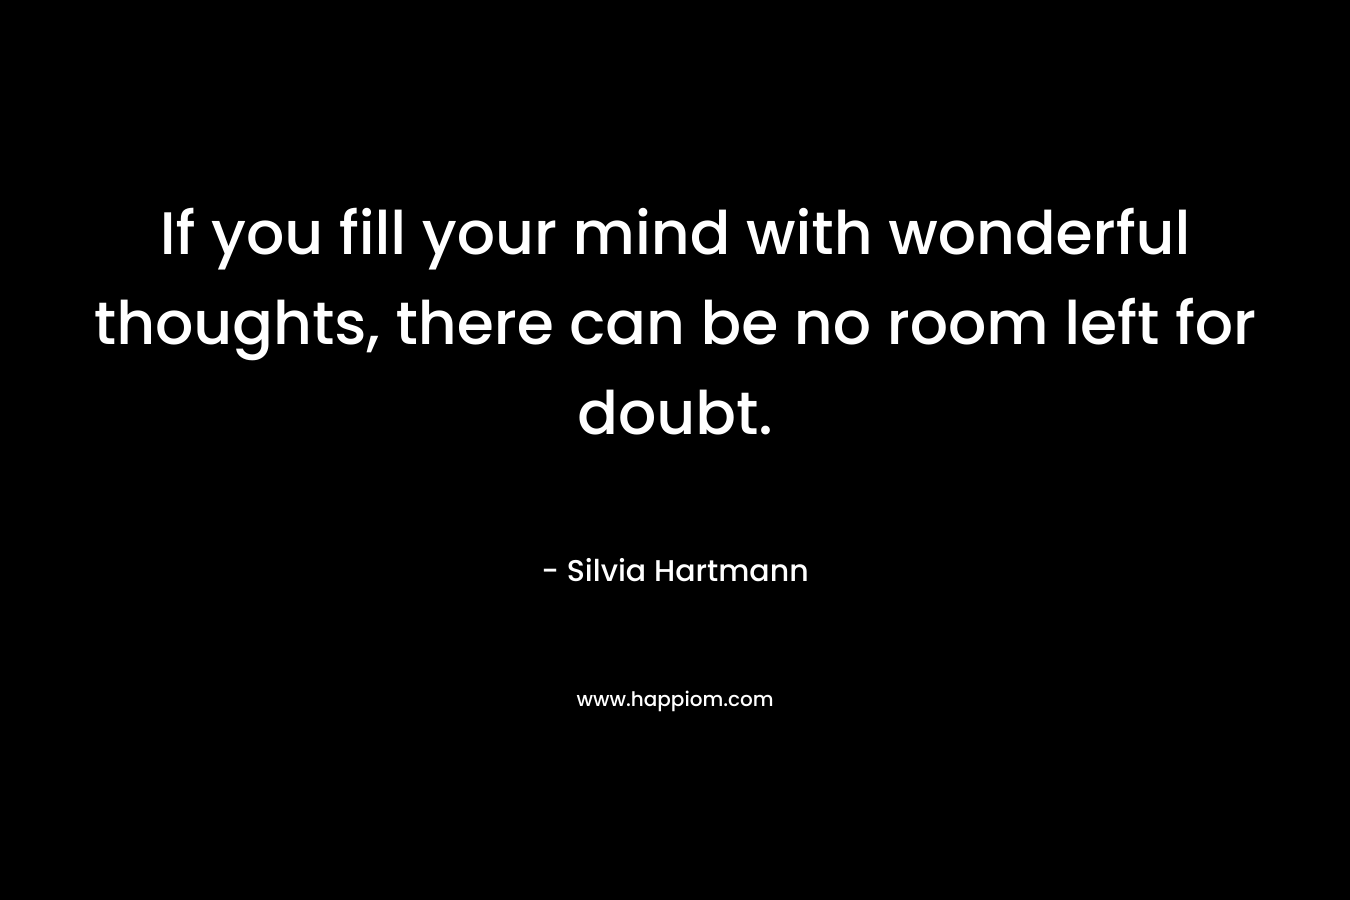 If you fill your mind with wonderful thoughts, there can be no room left for doubt. – Silvia Hartmann